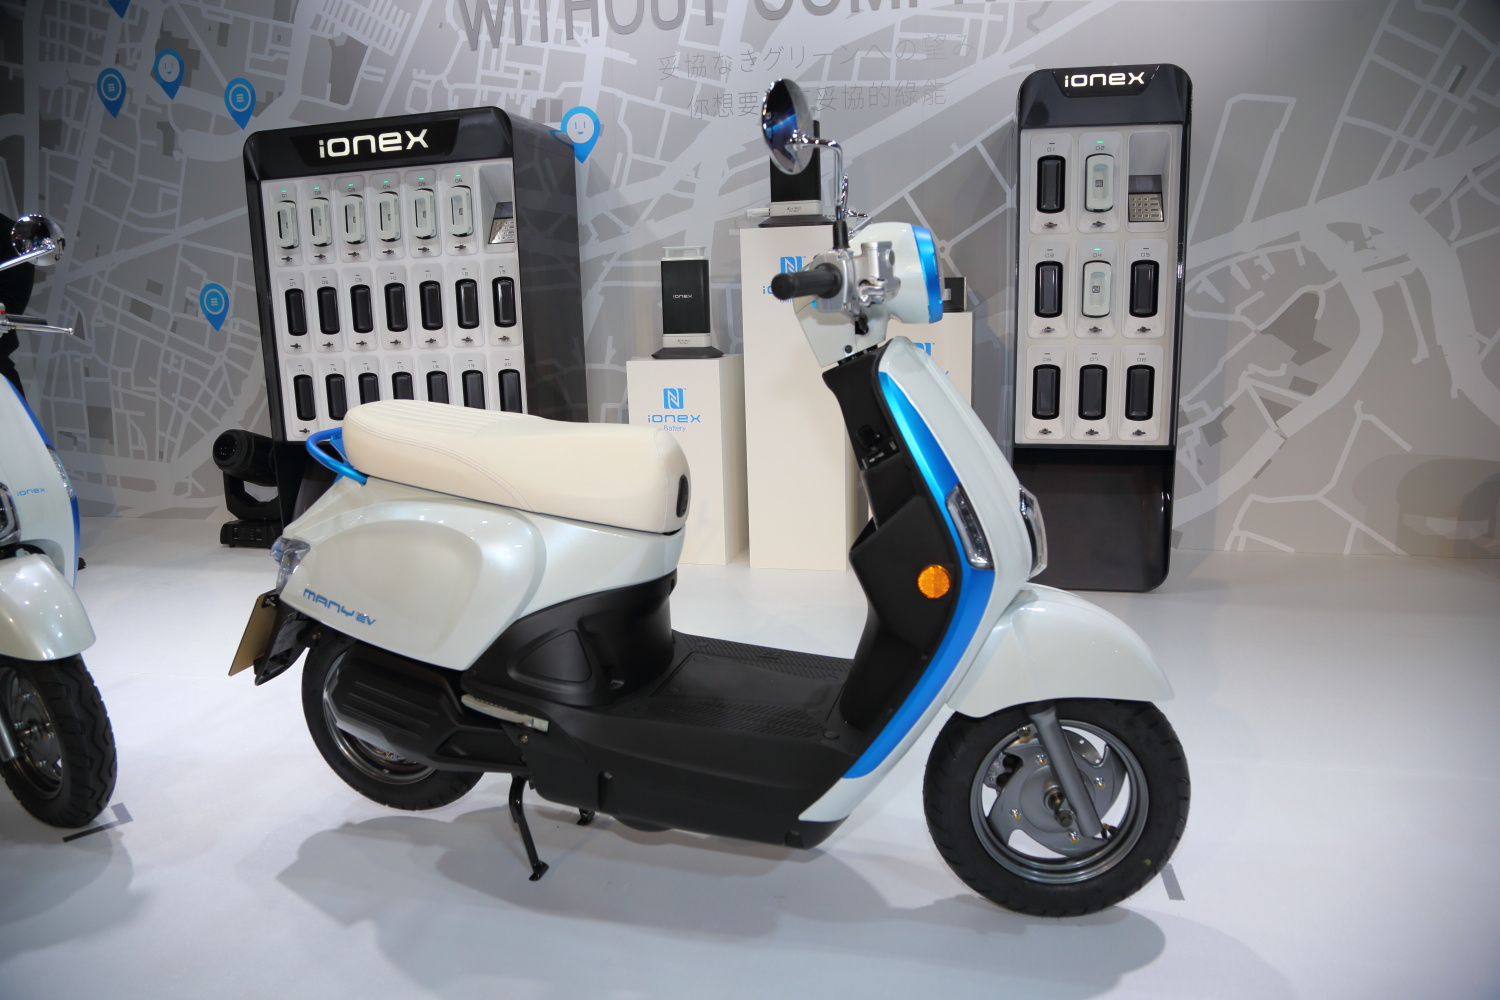 Kymco Ionex scooter launch